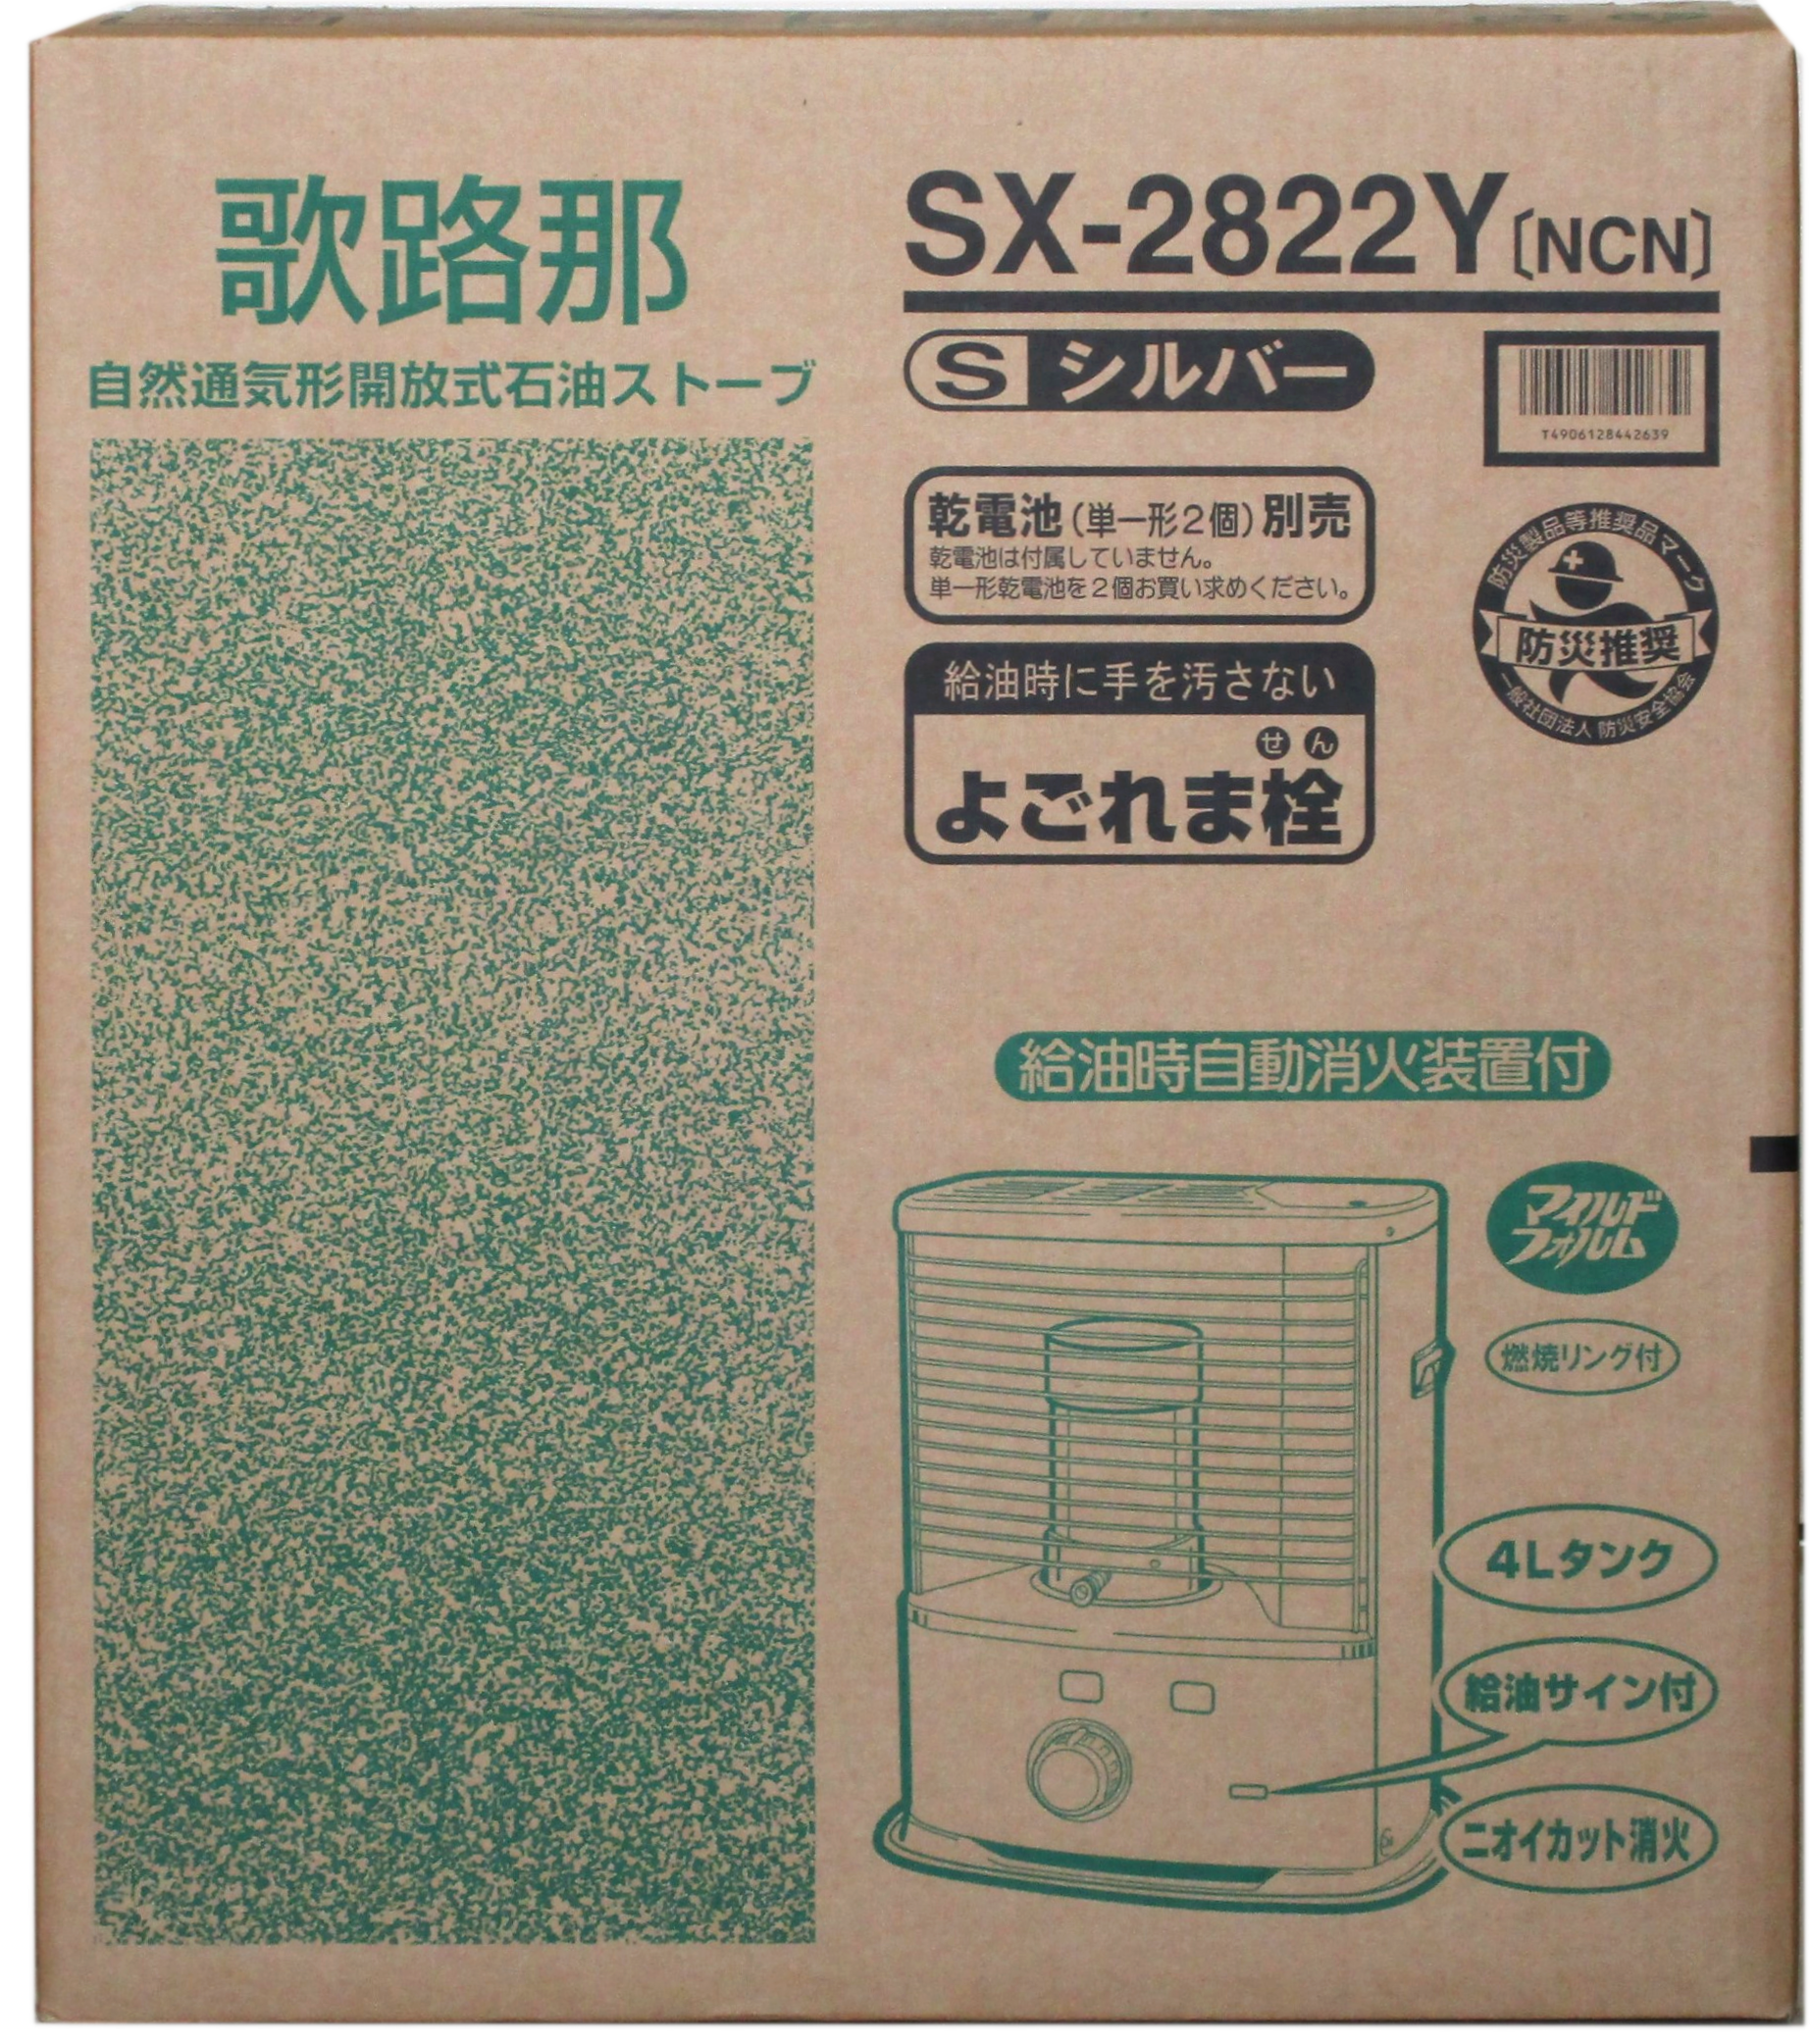 SX-2822Y正面.png